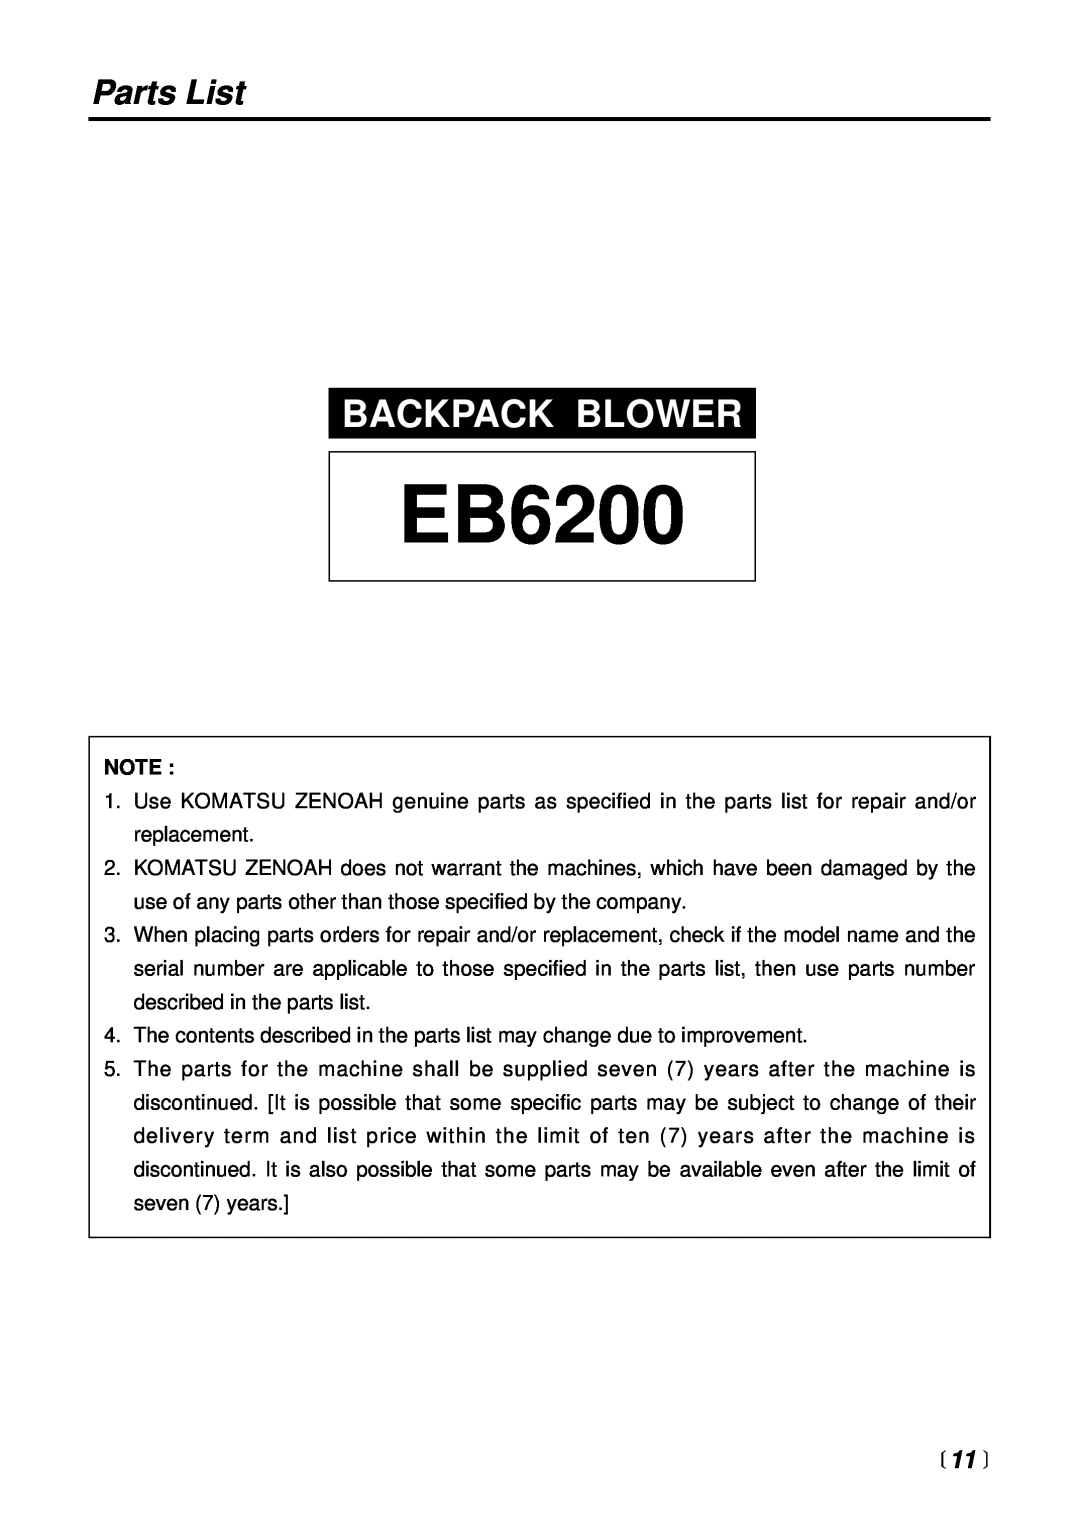 RedMax EB6200 manual Parts List, Backpack Blower, 11  